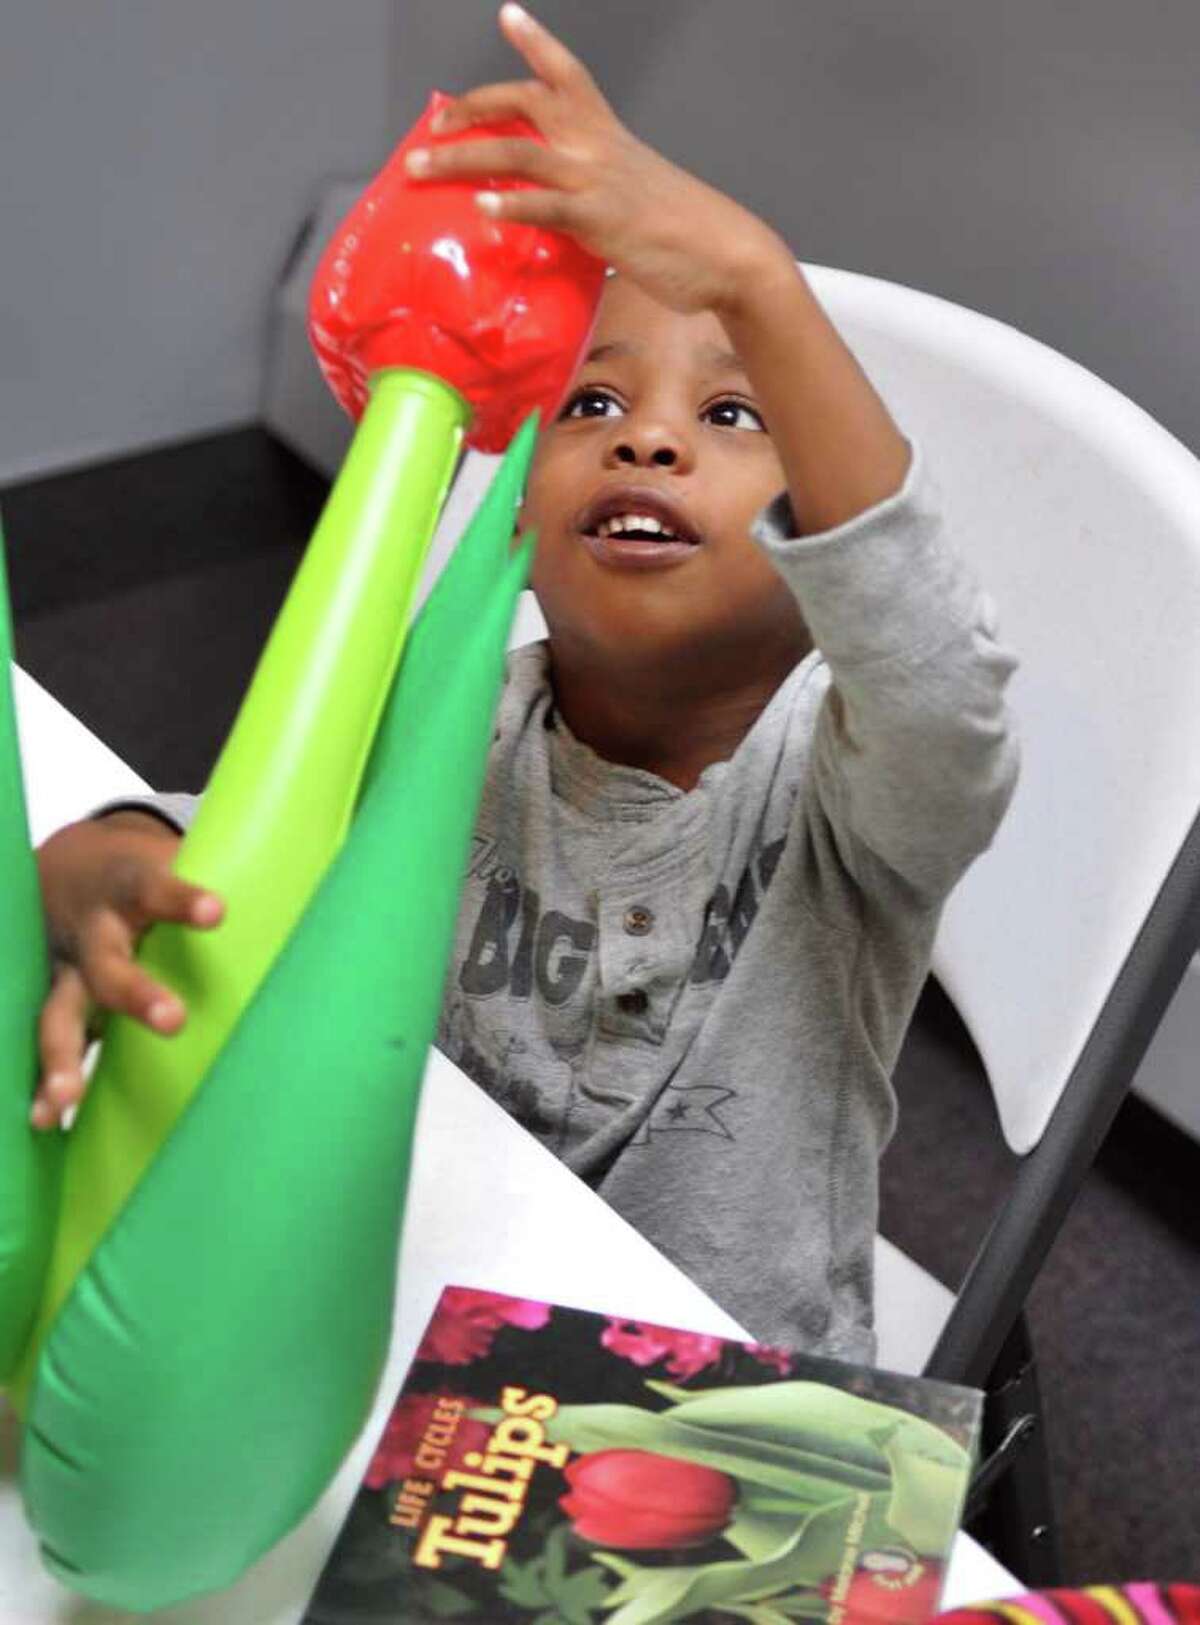 Nasim Sanders-Smith, 4, of Albany with an inflatable tulip during a preschool program about tulips using the STEM model (Science, Technology, Engineering, and Math) at the Albany Heritage Area Visitors Center Thursday Oct. 20, 2011. (John Carl D'Annibale / Times Union)